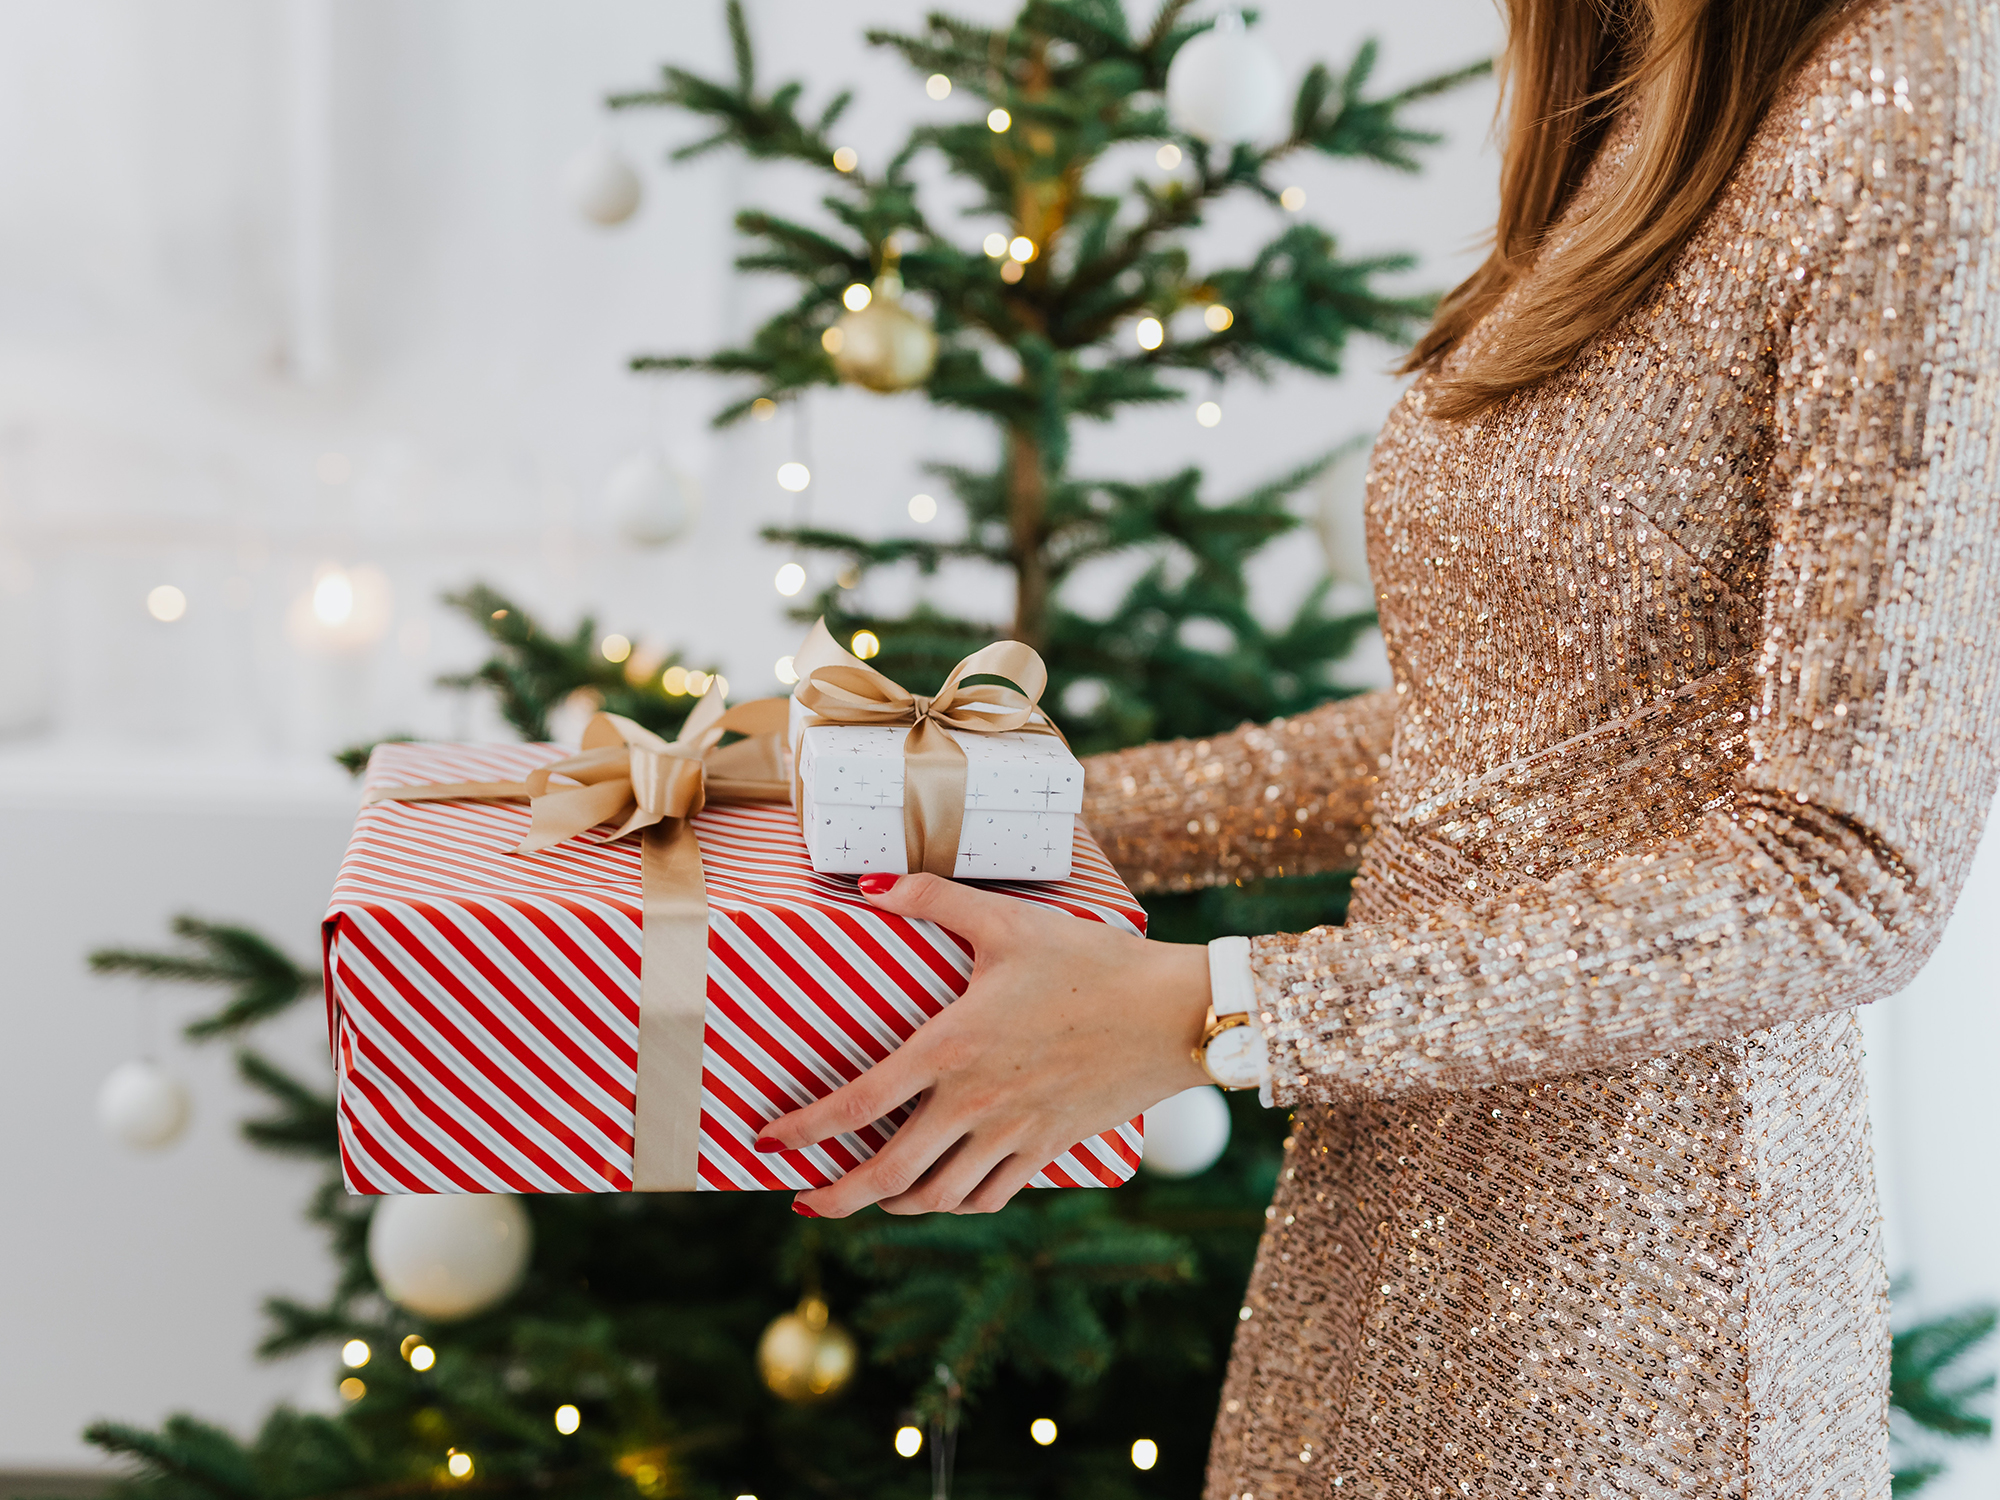 https://inventora.com/wp-content/uploads/2021/12/ultimate-gift-guide-holiday-season-feature.jpg